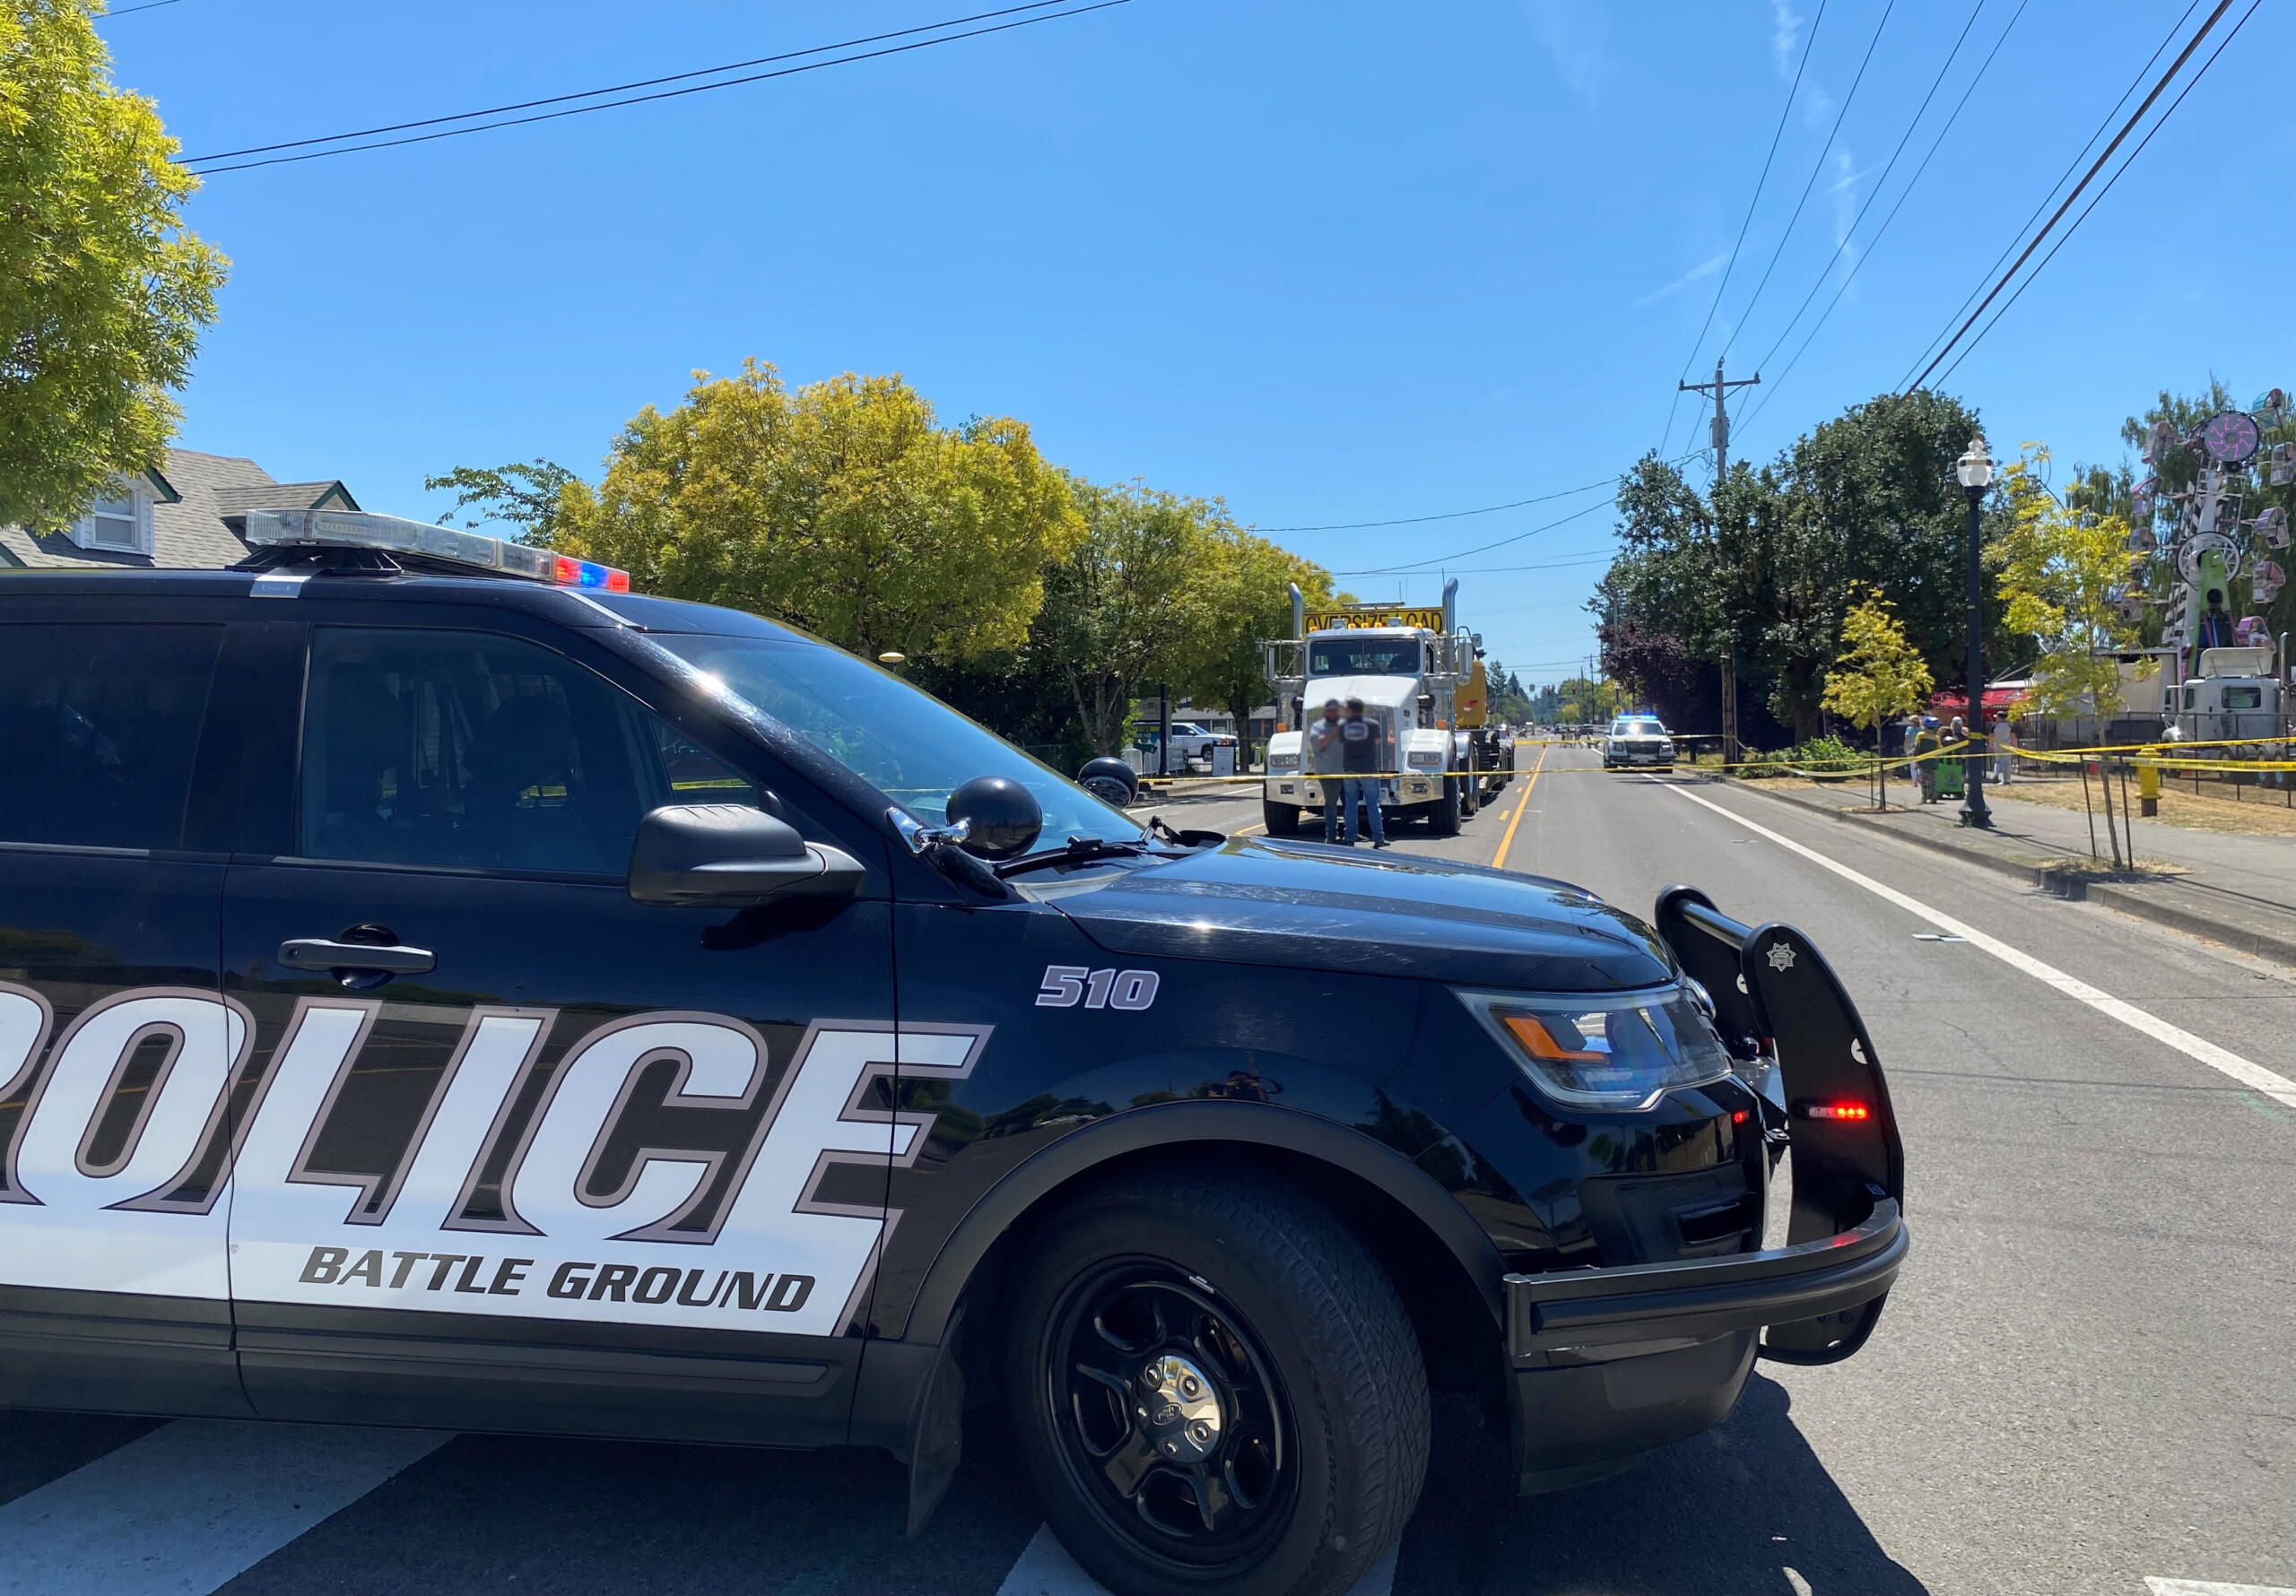 A Battle Ground police vehicle is parked at the scene of an incident that occurred during the Harvest Days Parade on Saturday, July 15, 2023, in Battle Ground.